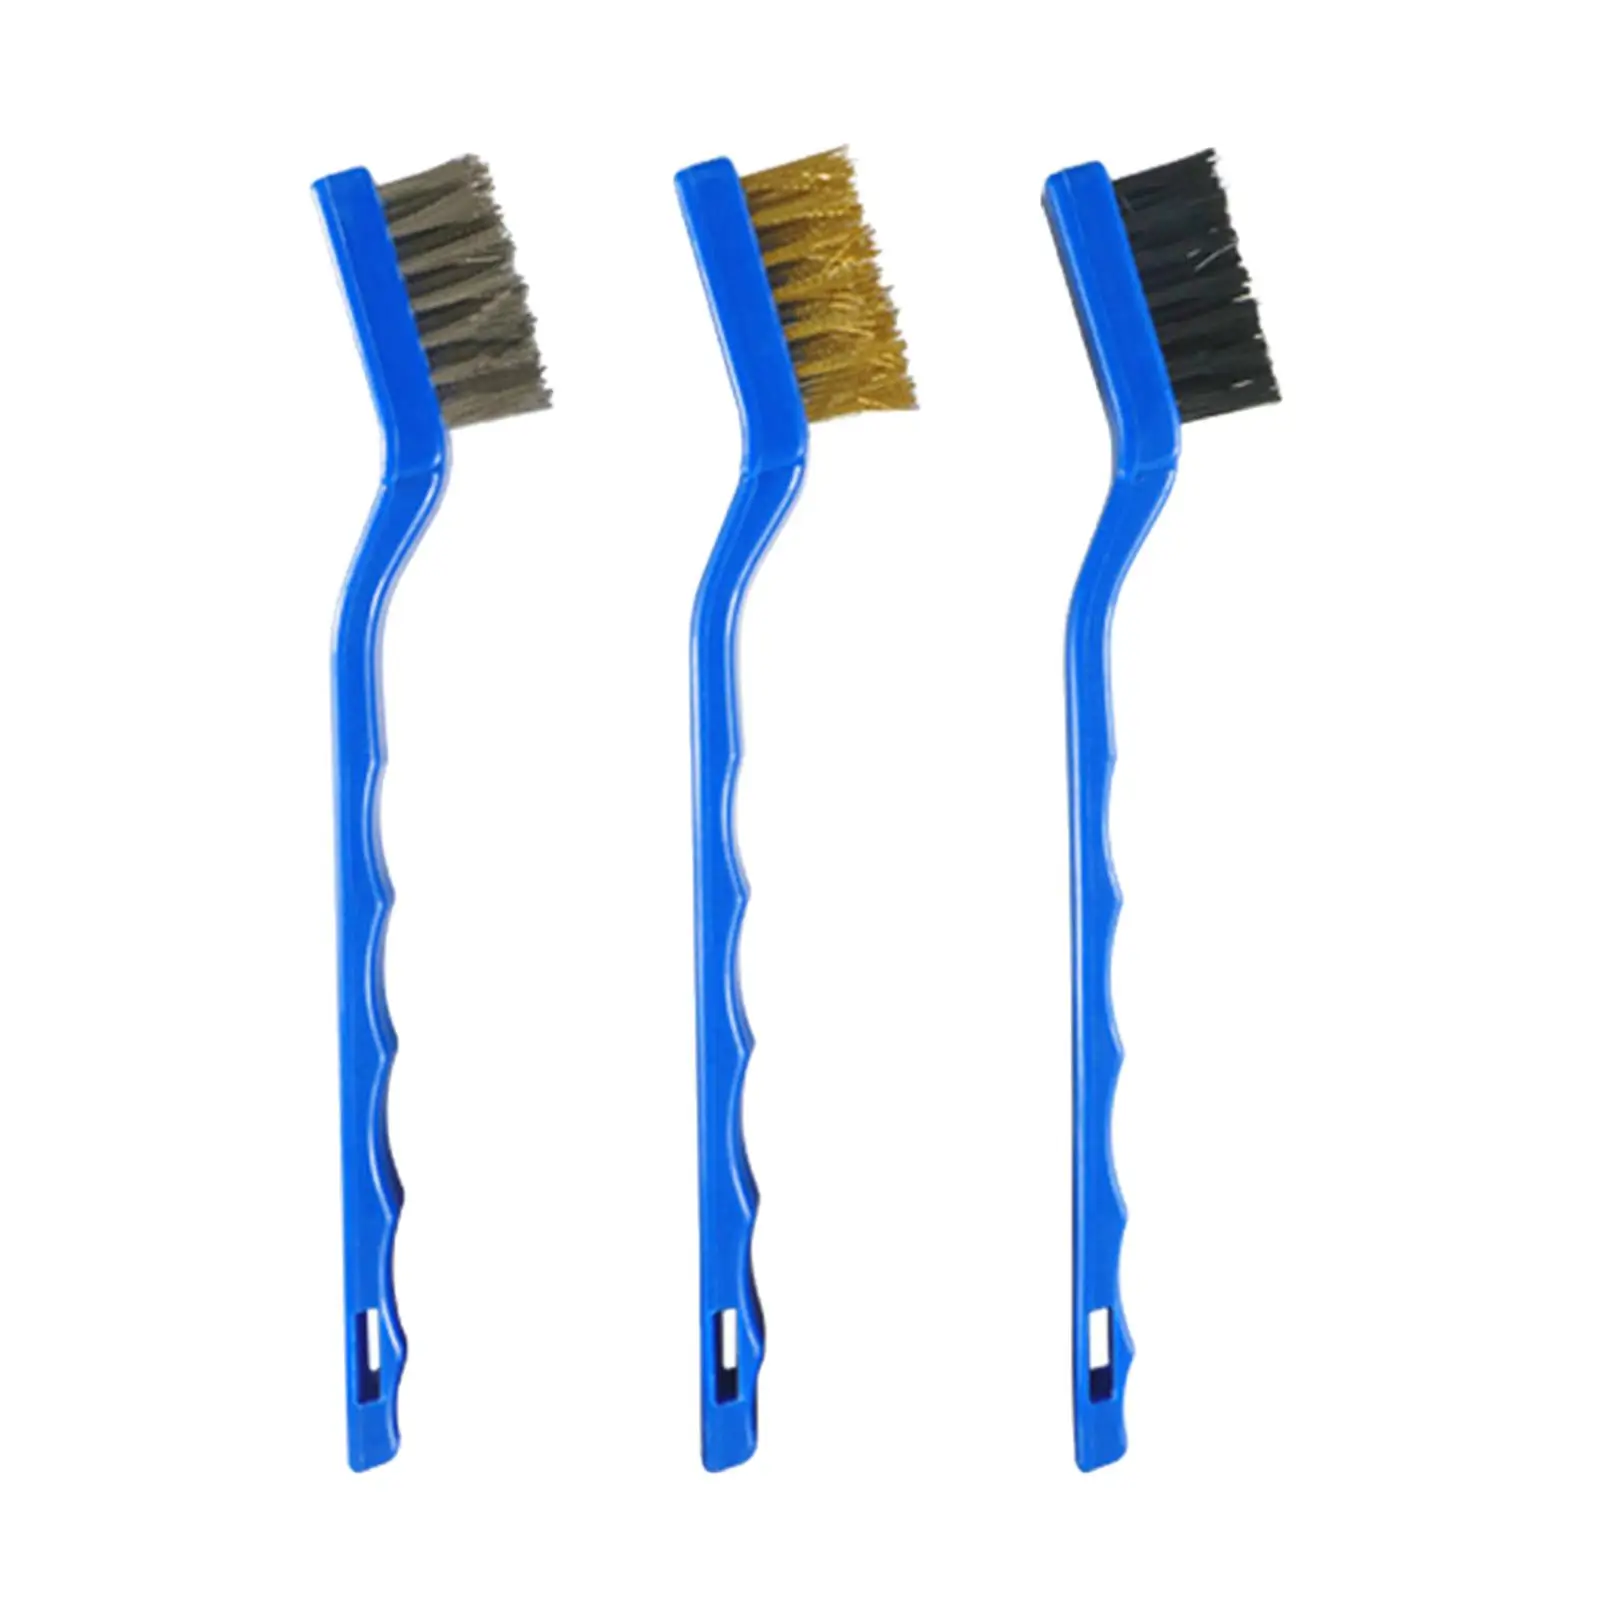 3x Car Engine Cleaning Brushes, Car Detailing Brushes Handy Tool Professional